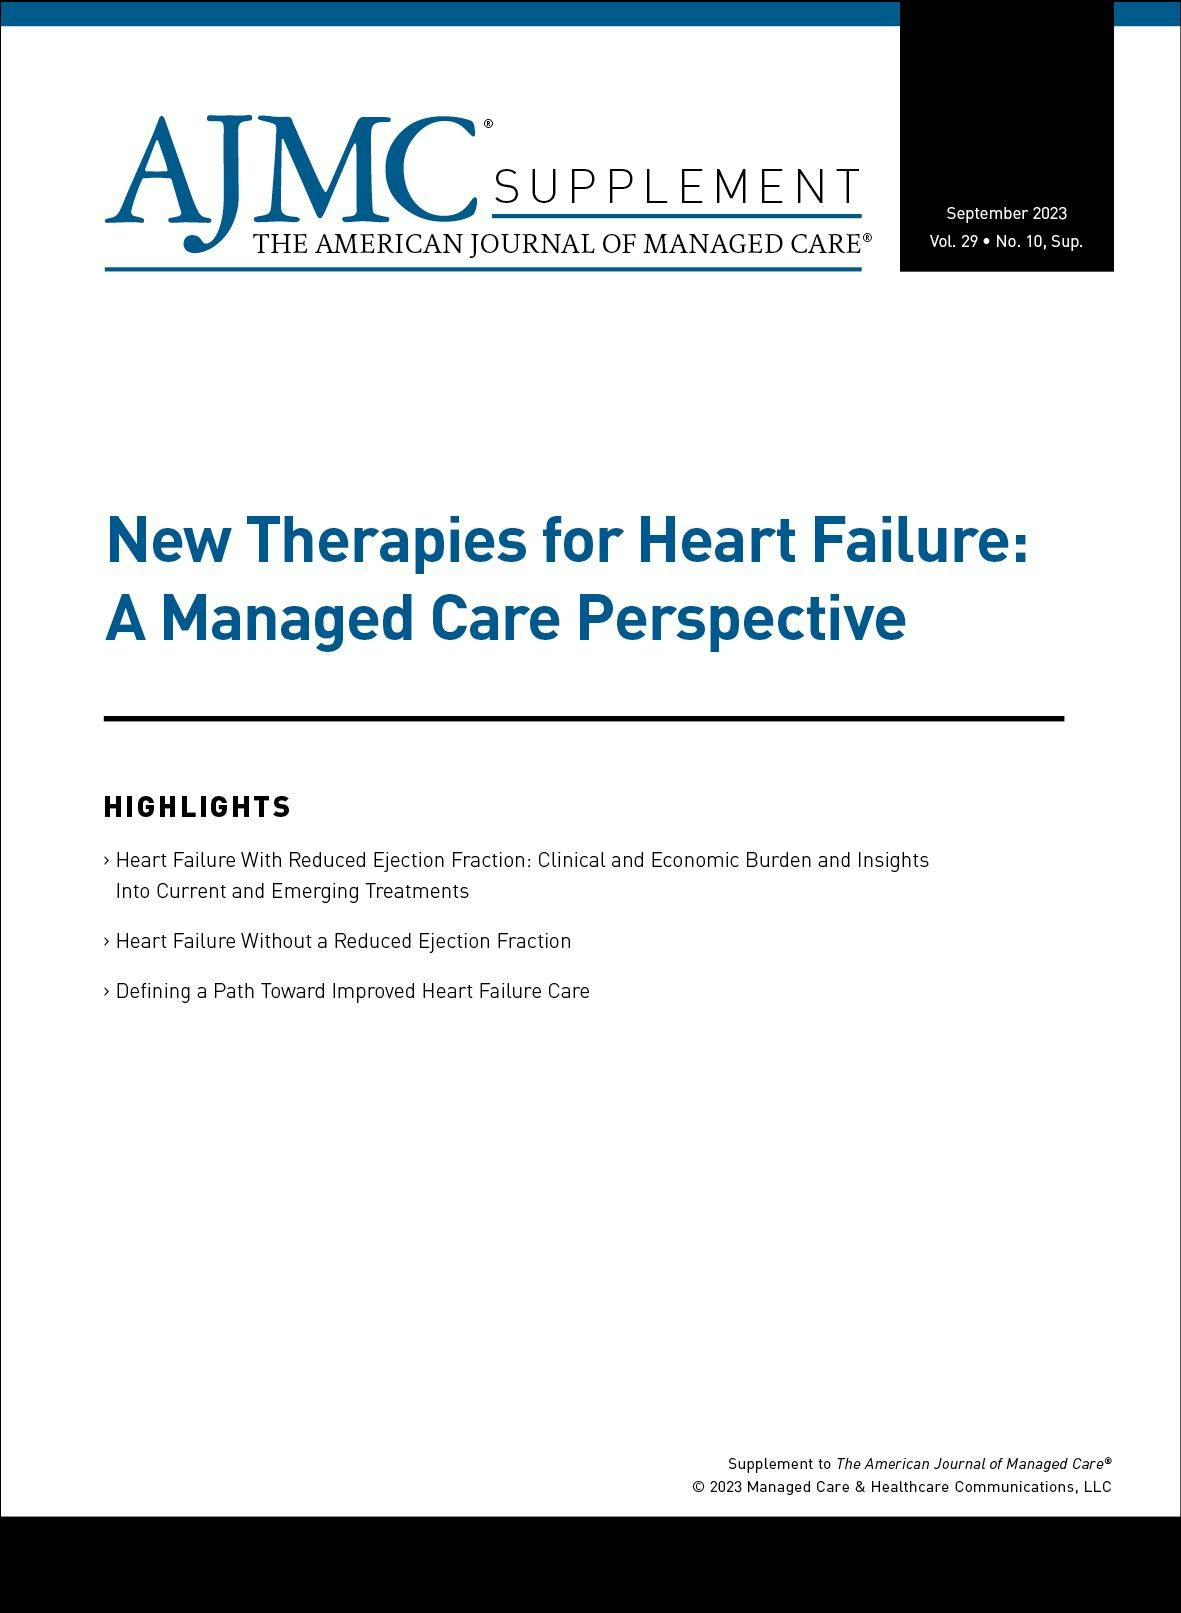 New Therapies for Heart Failure: A Managed Care Perspective